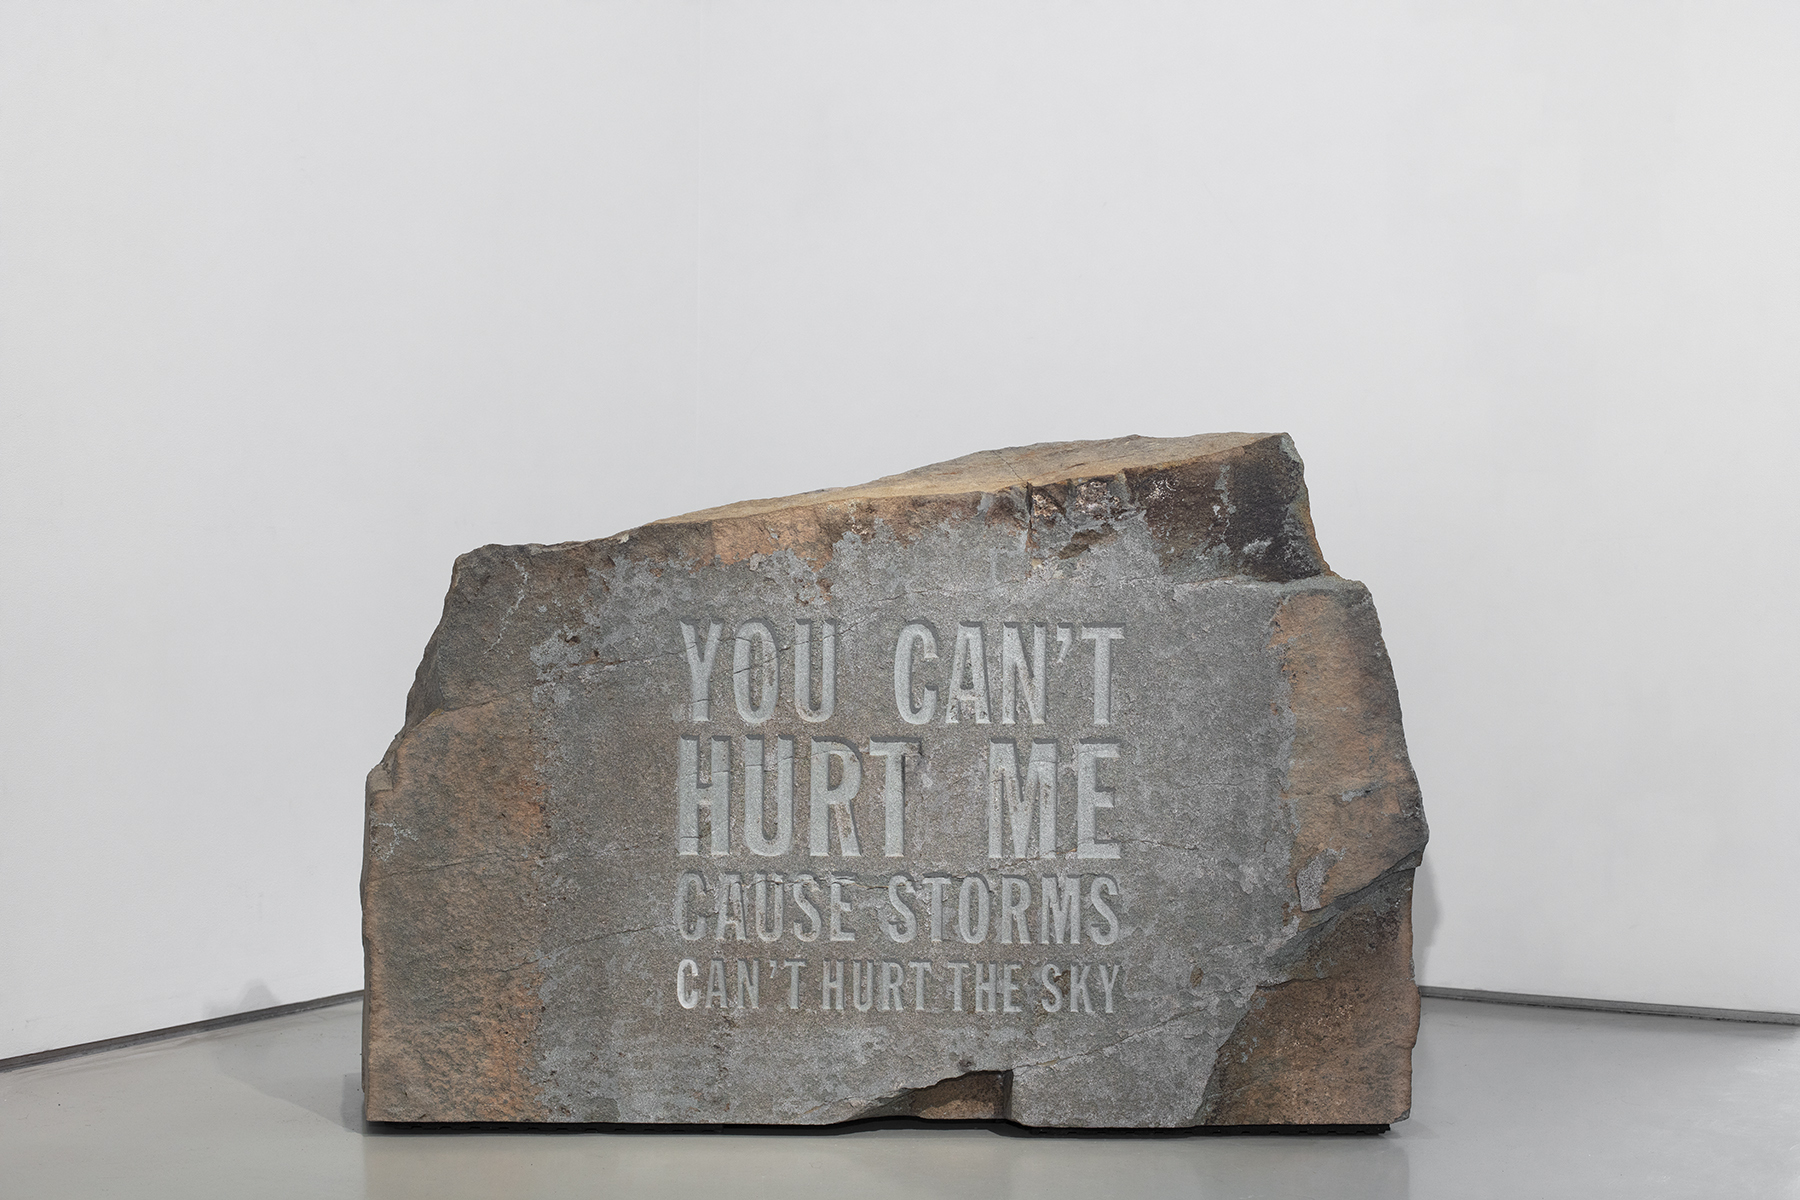 John Giorno’s “You Can’t Hurt Me Cause Storms Can’t Hurt the Sky,” 2019.